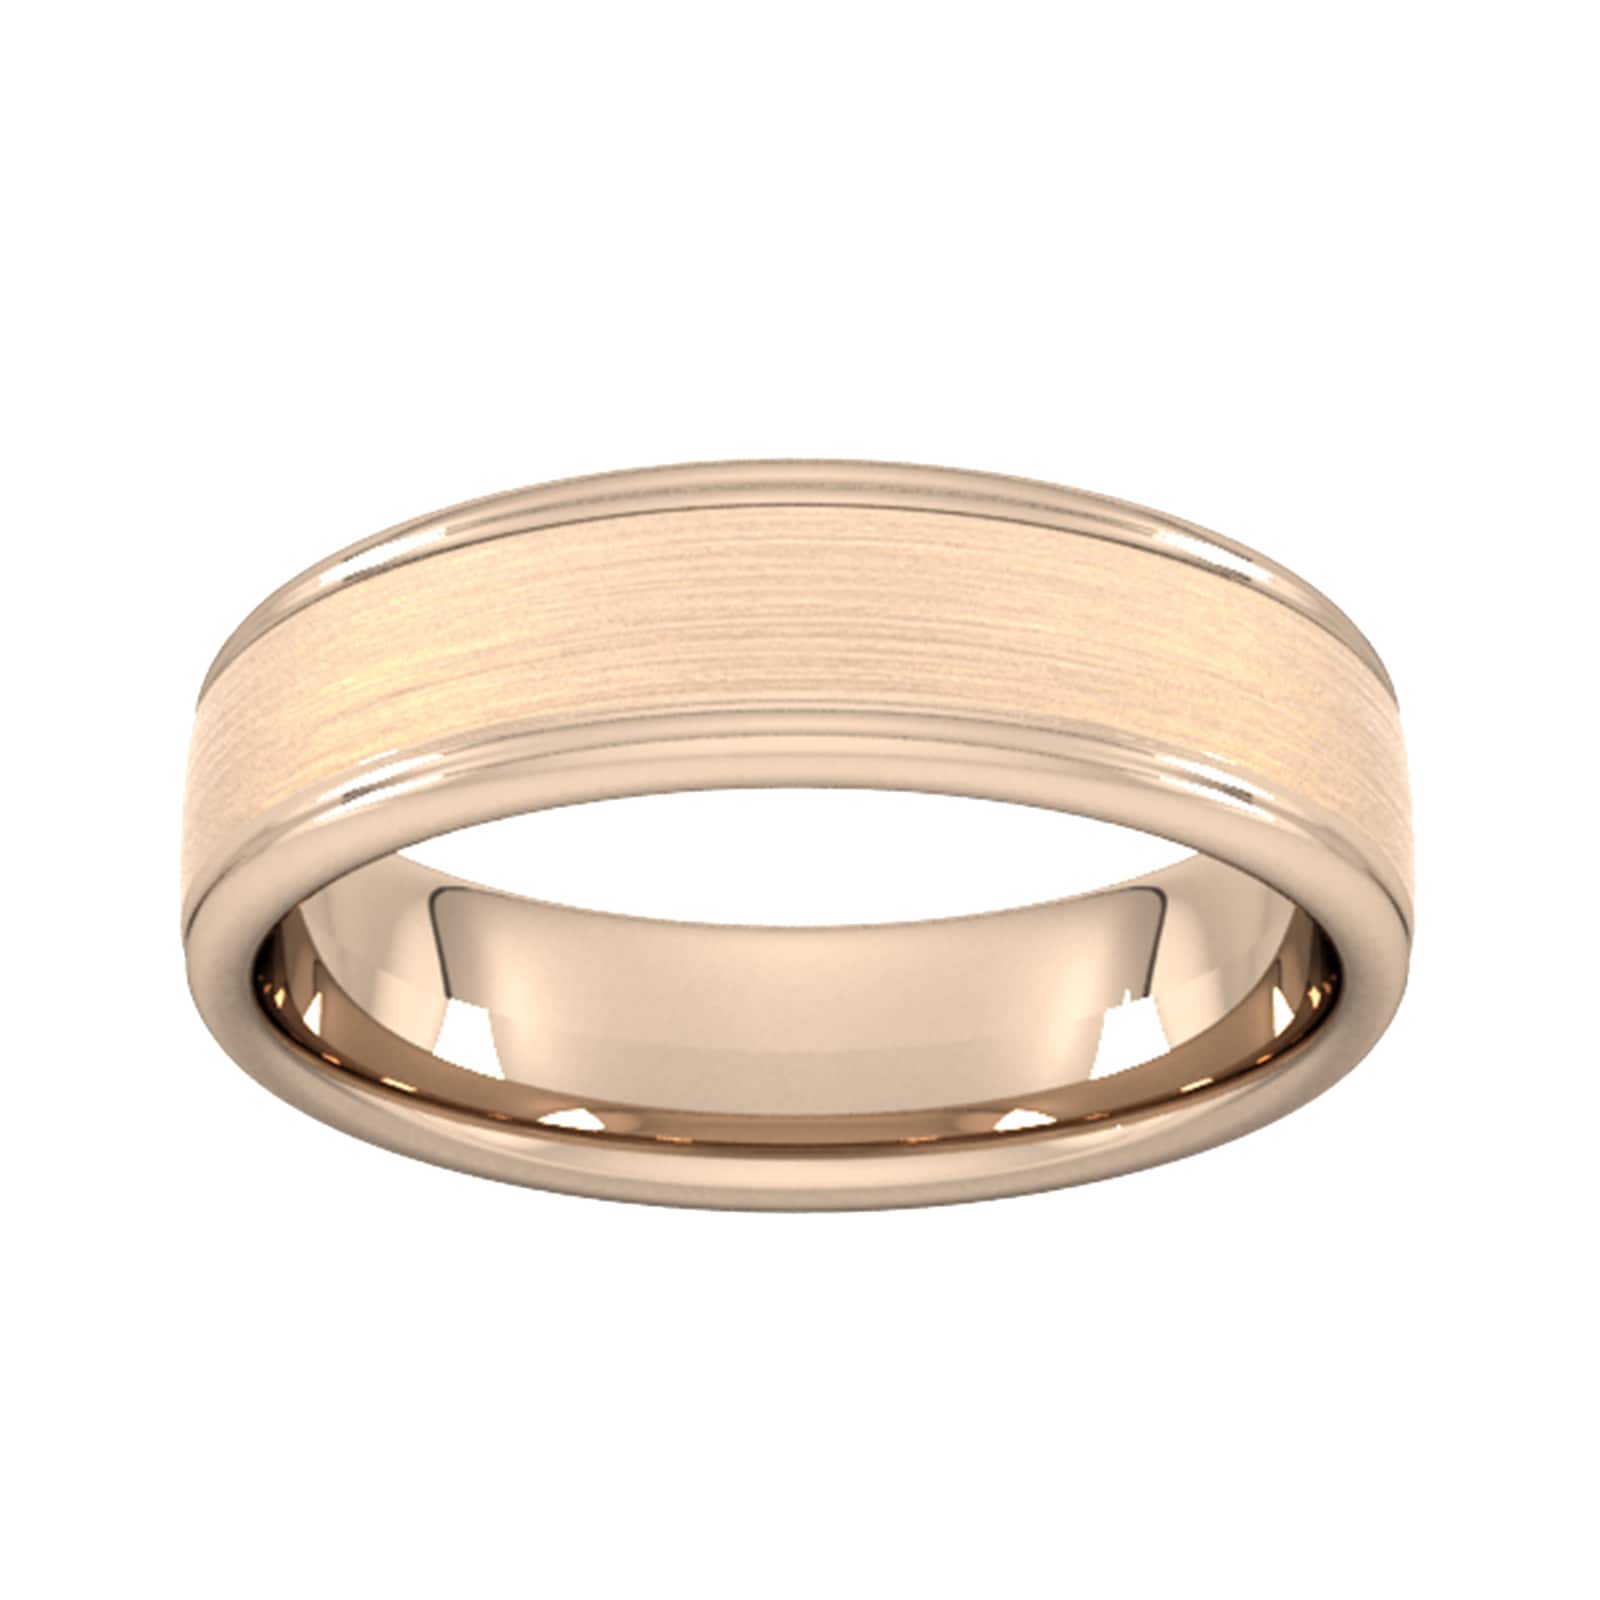 5mm Flat Court Heavy Matt Centre With Grooves Wedding Ring In 9 Carat Rose Gold - Ring Size U